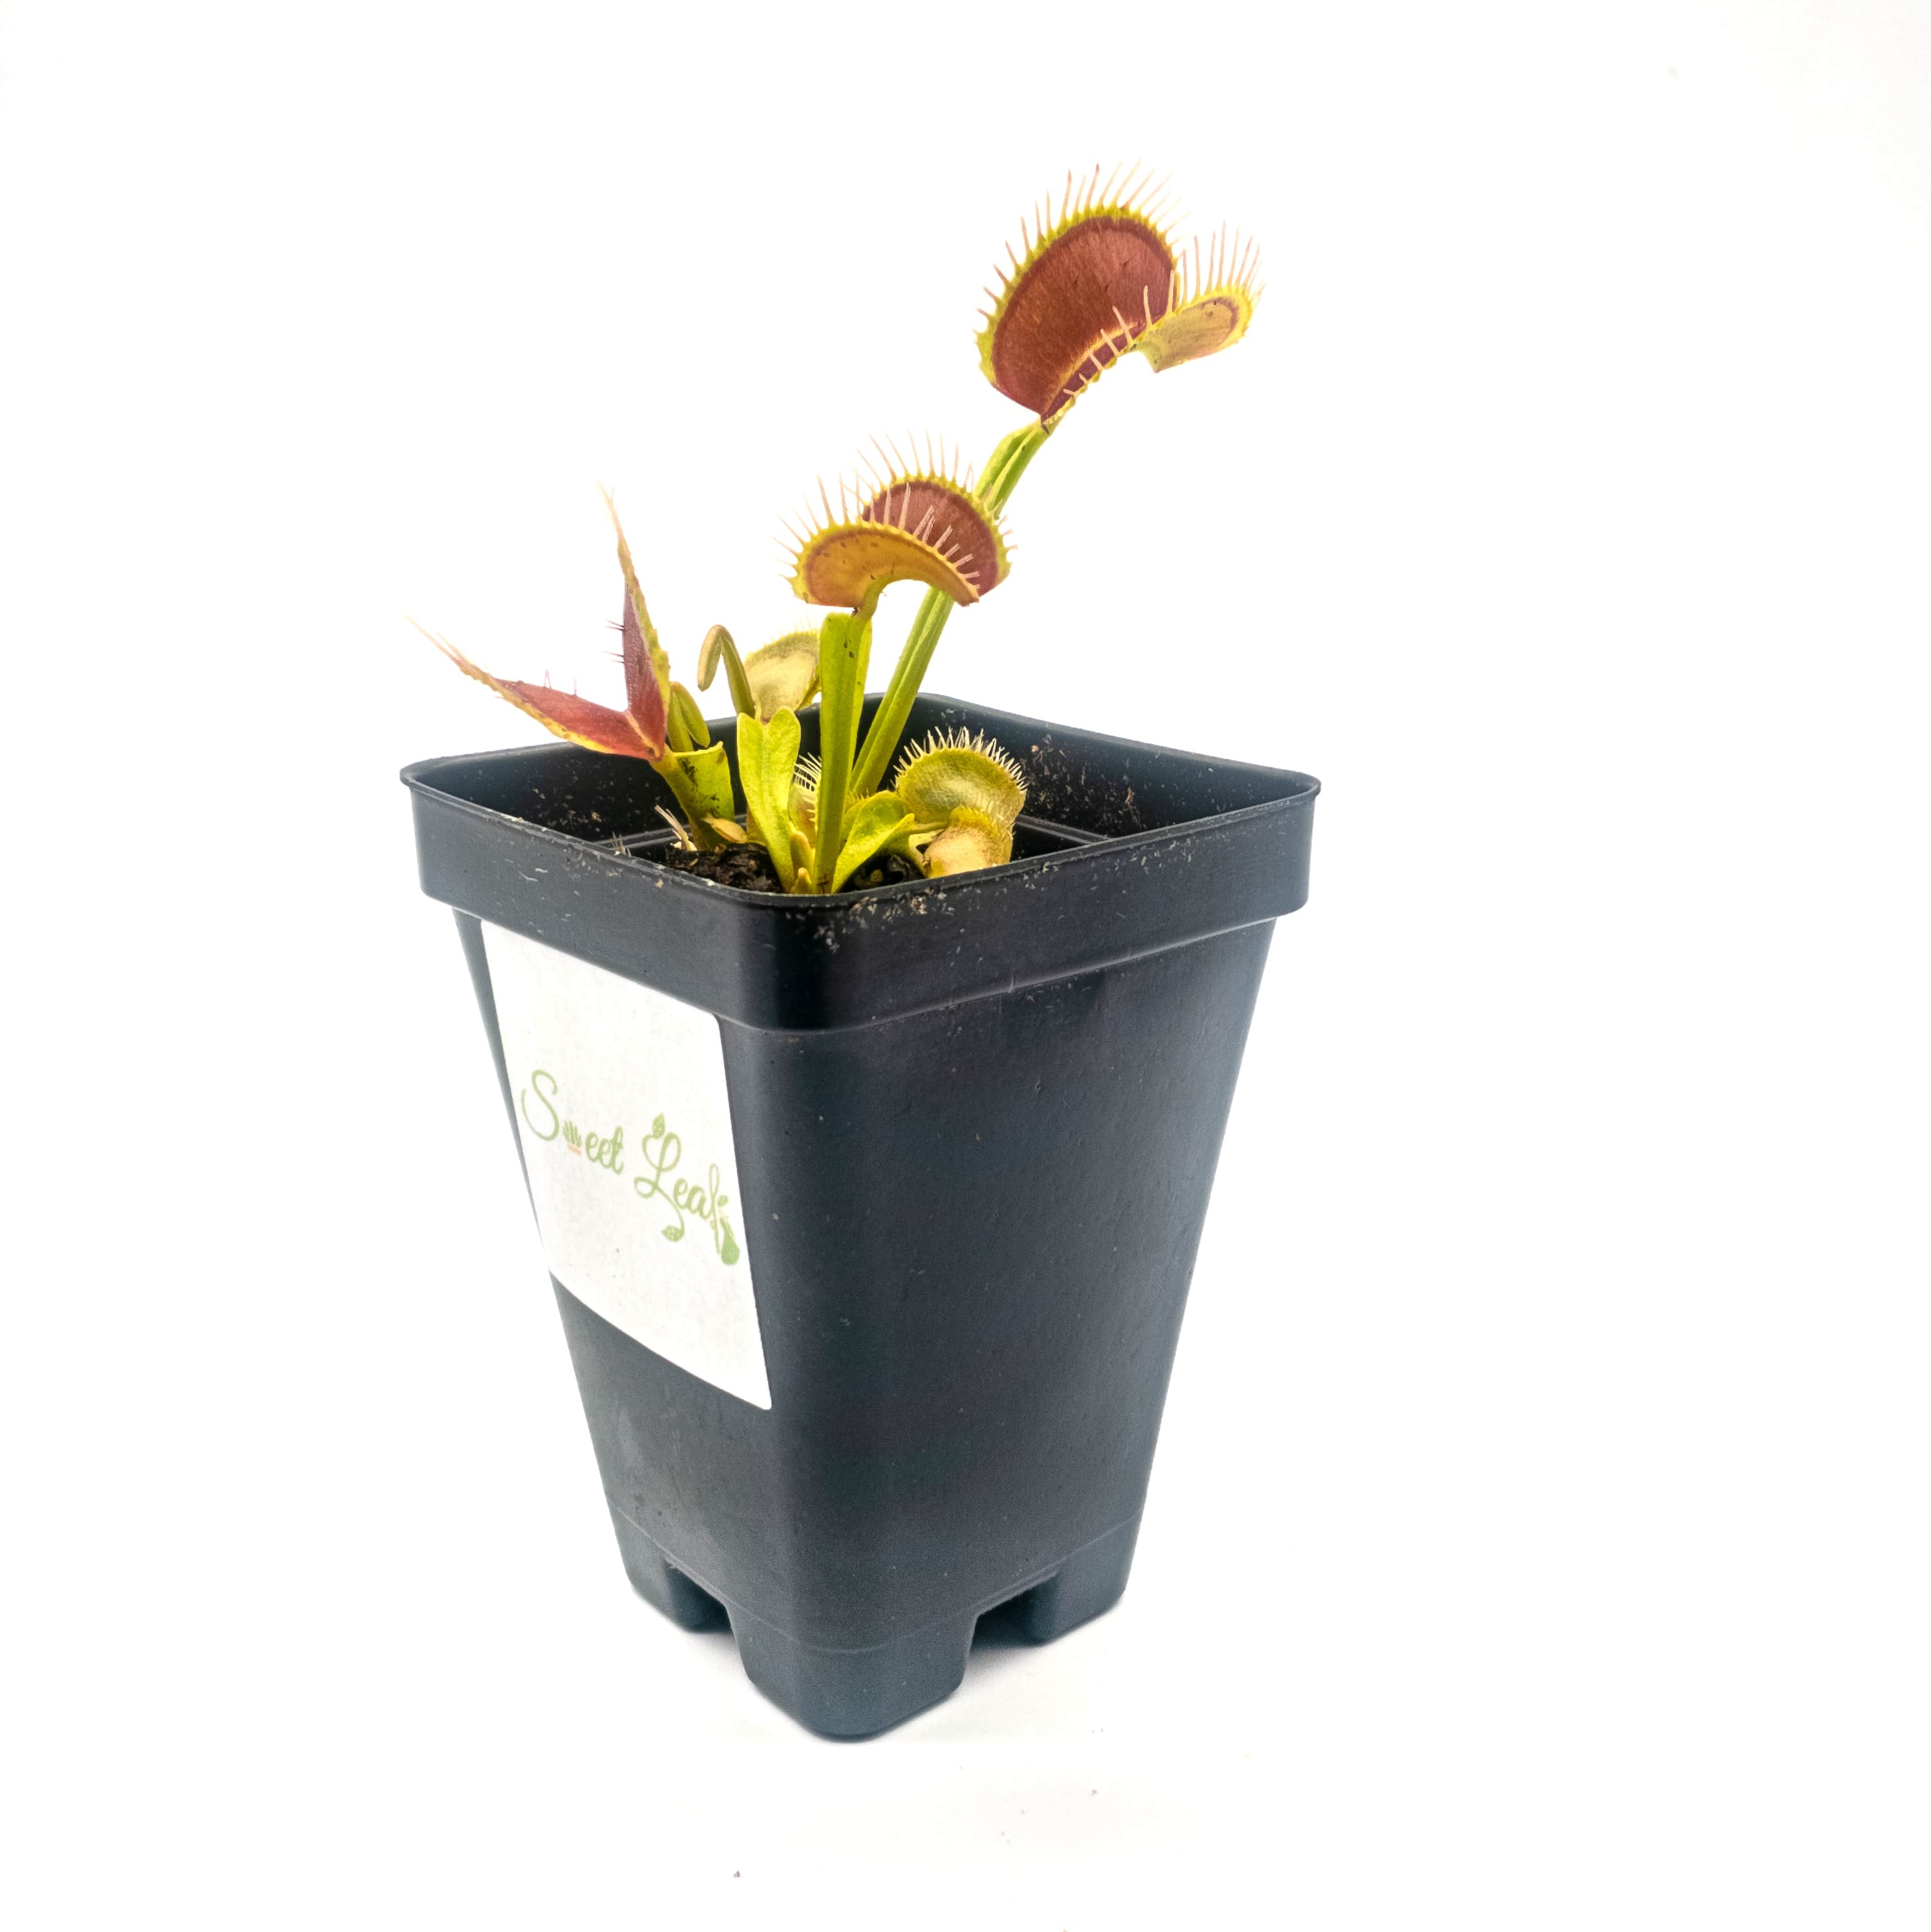 Dionaea m. Typical Potted